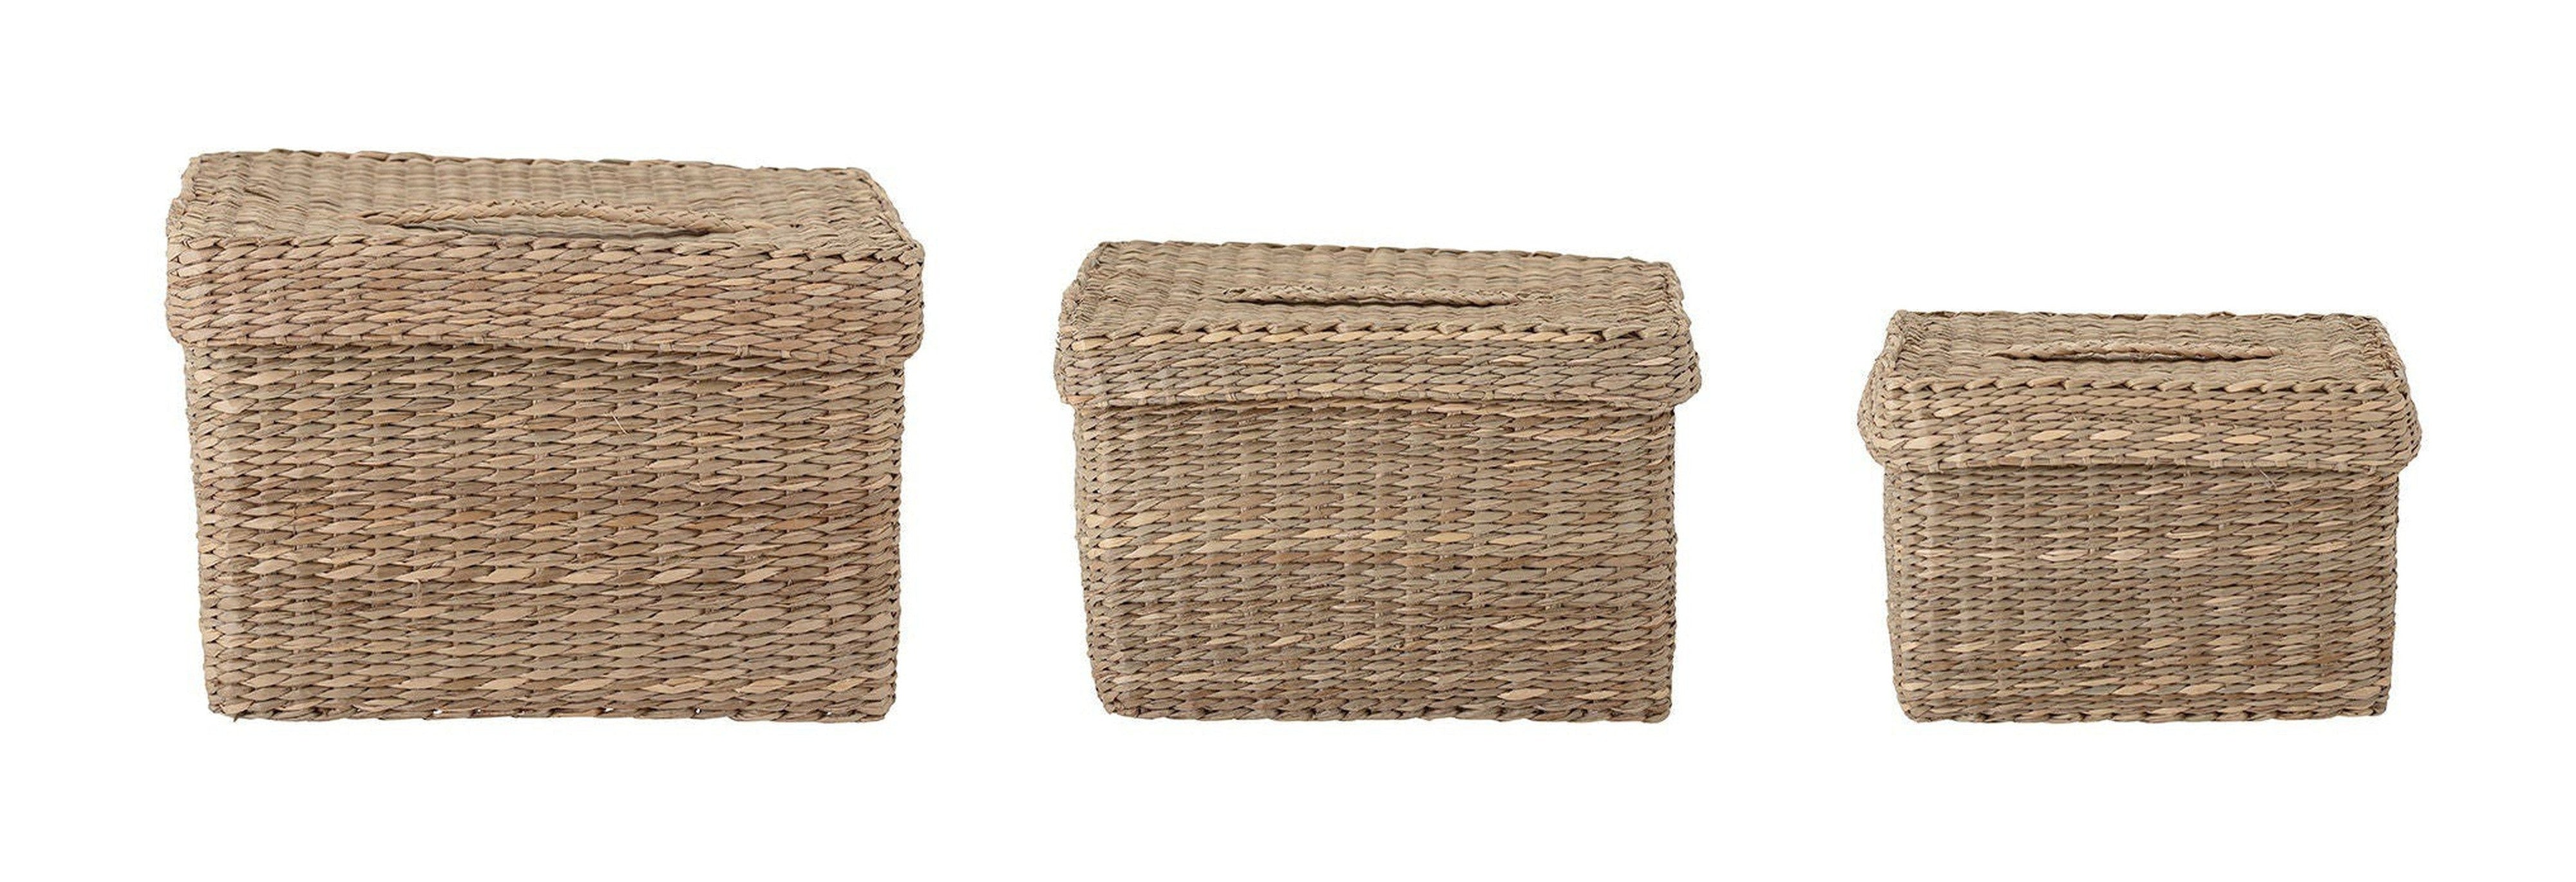 Bloomingville Givan Basket w/Lid, Nature, Seagrass